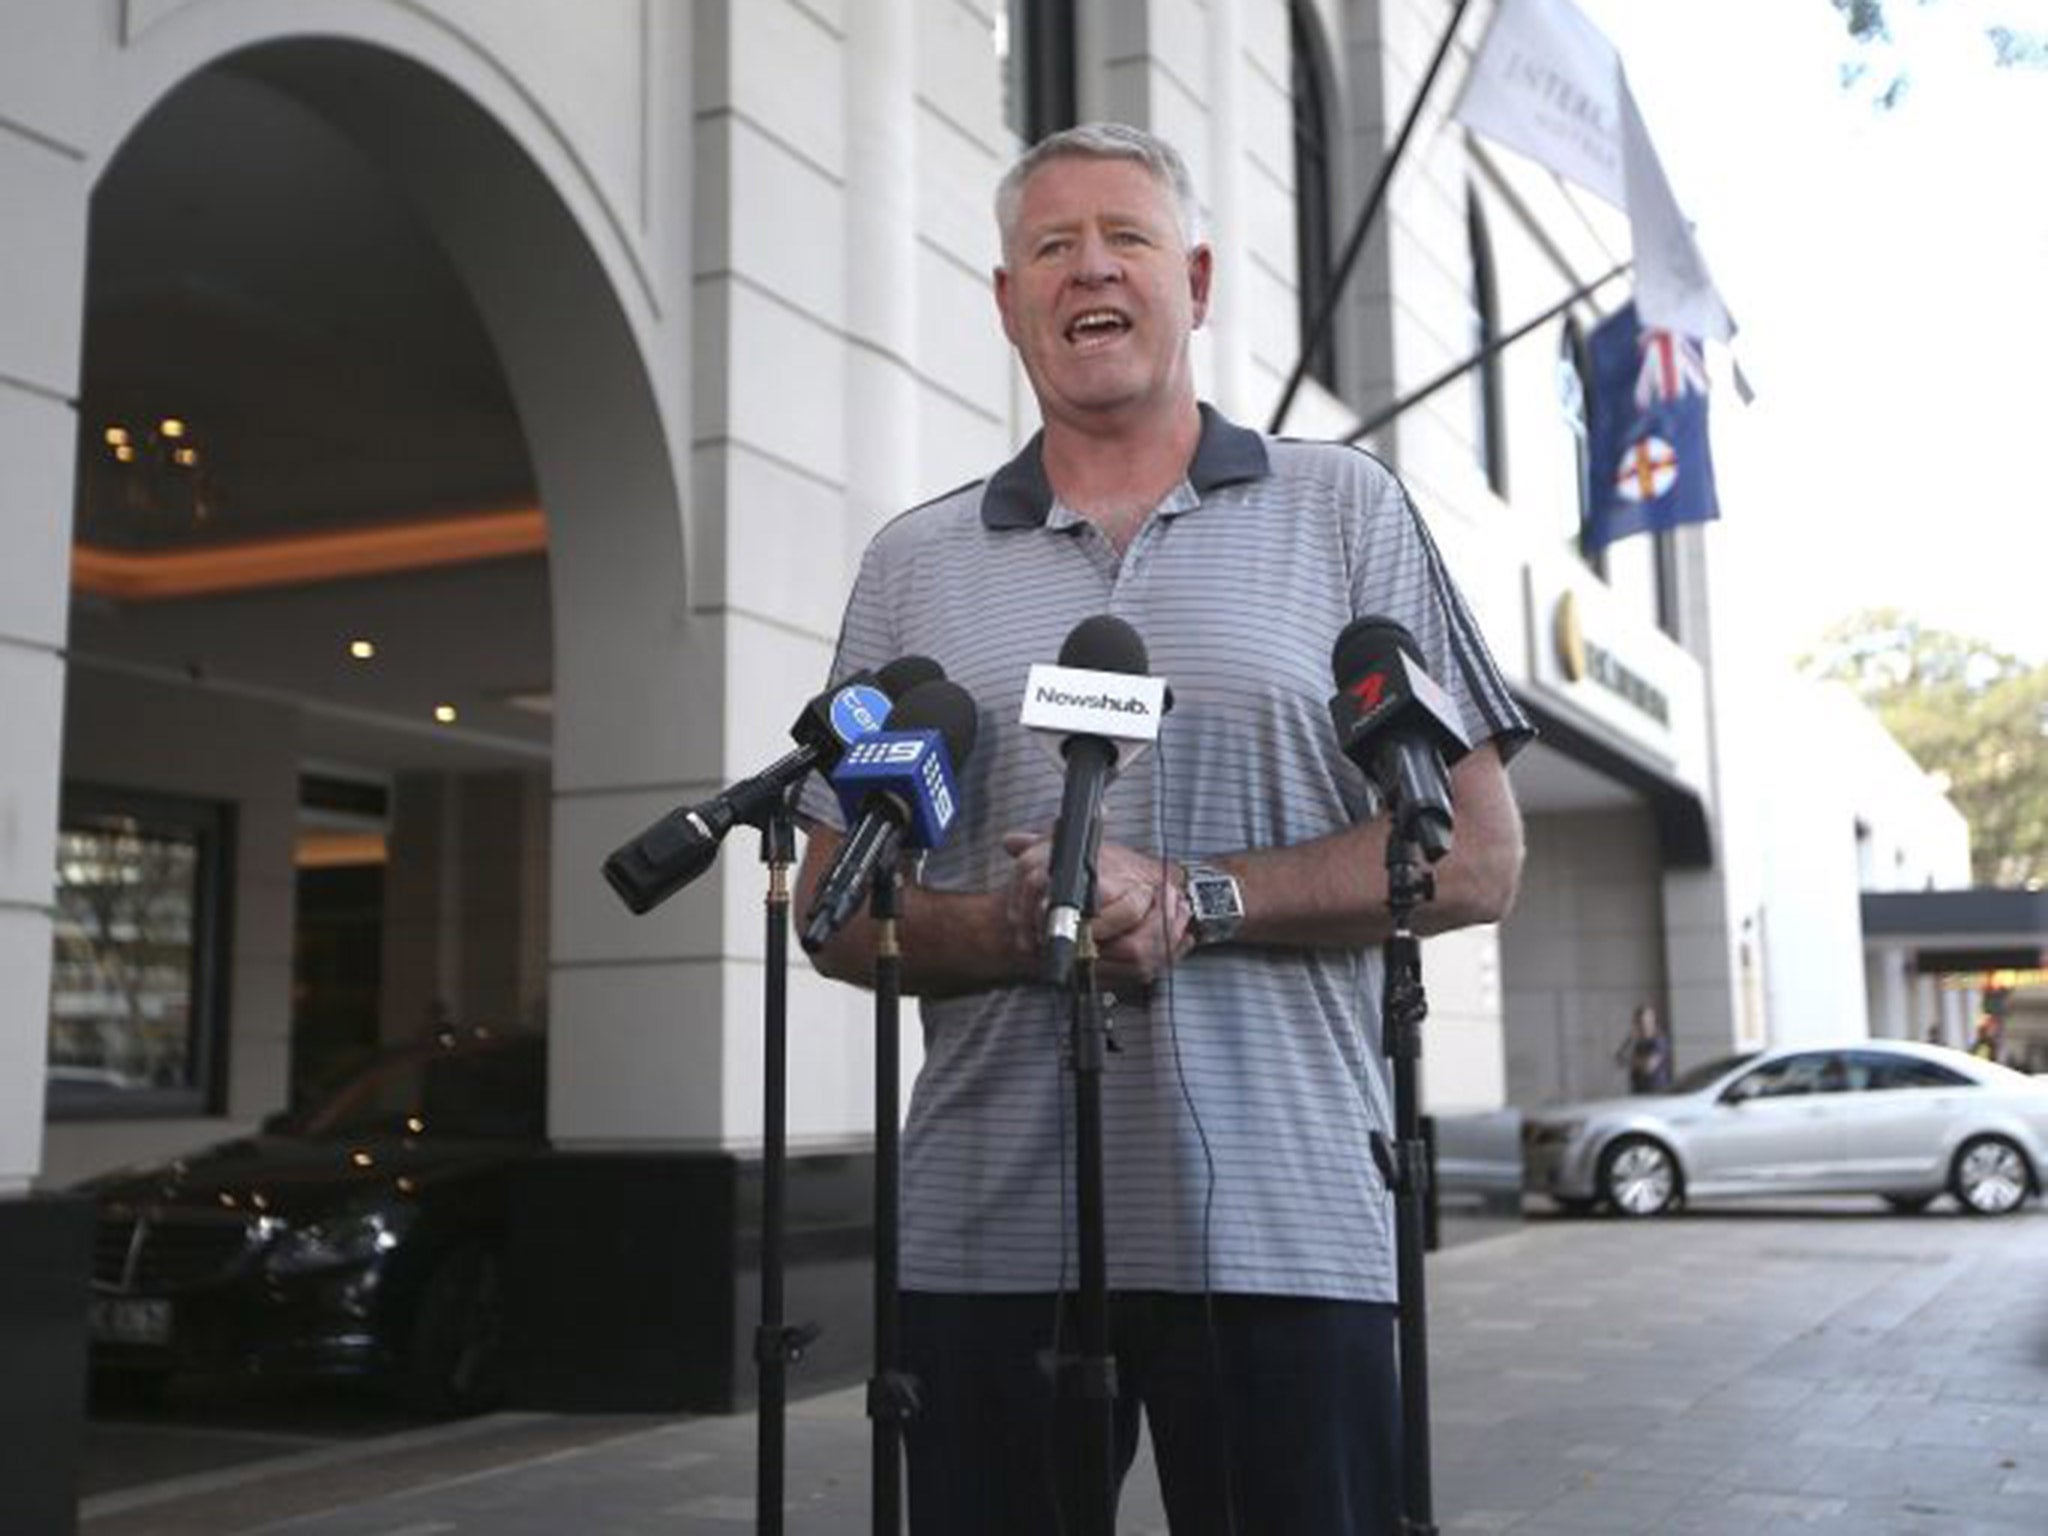 New Zealand Rugby Union CEO Steve Tew speaks to the media outside a hotel in Sydney